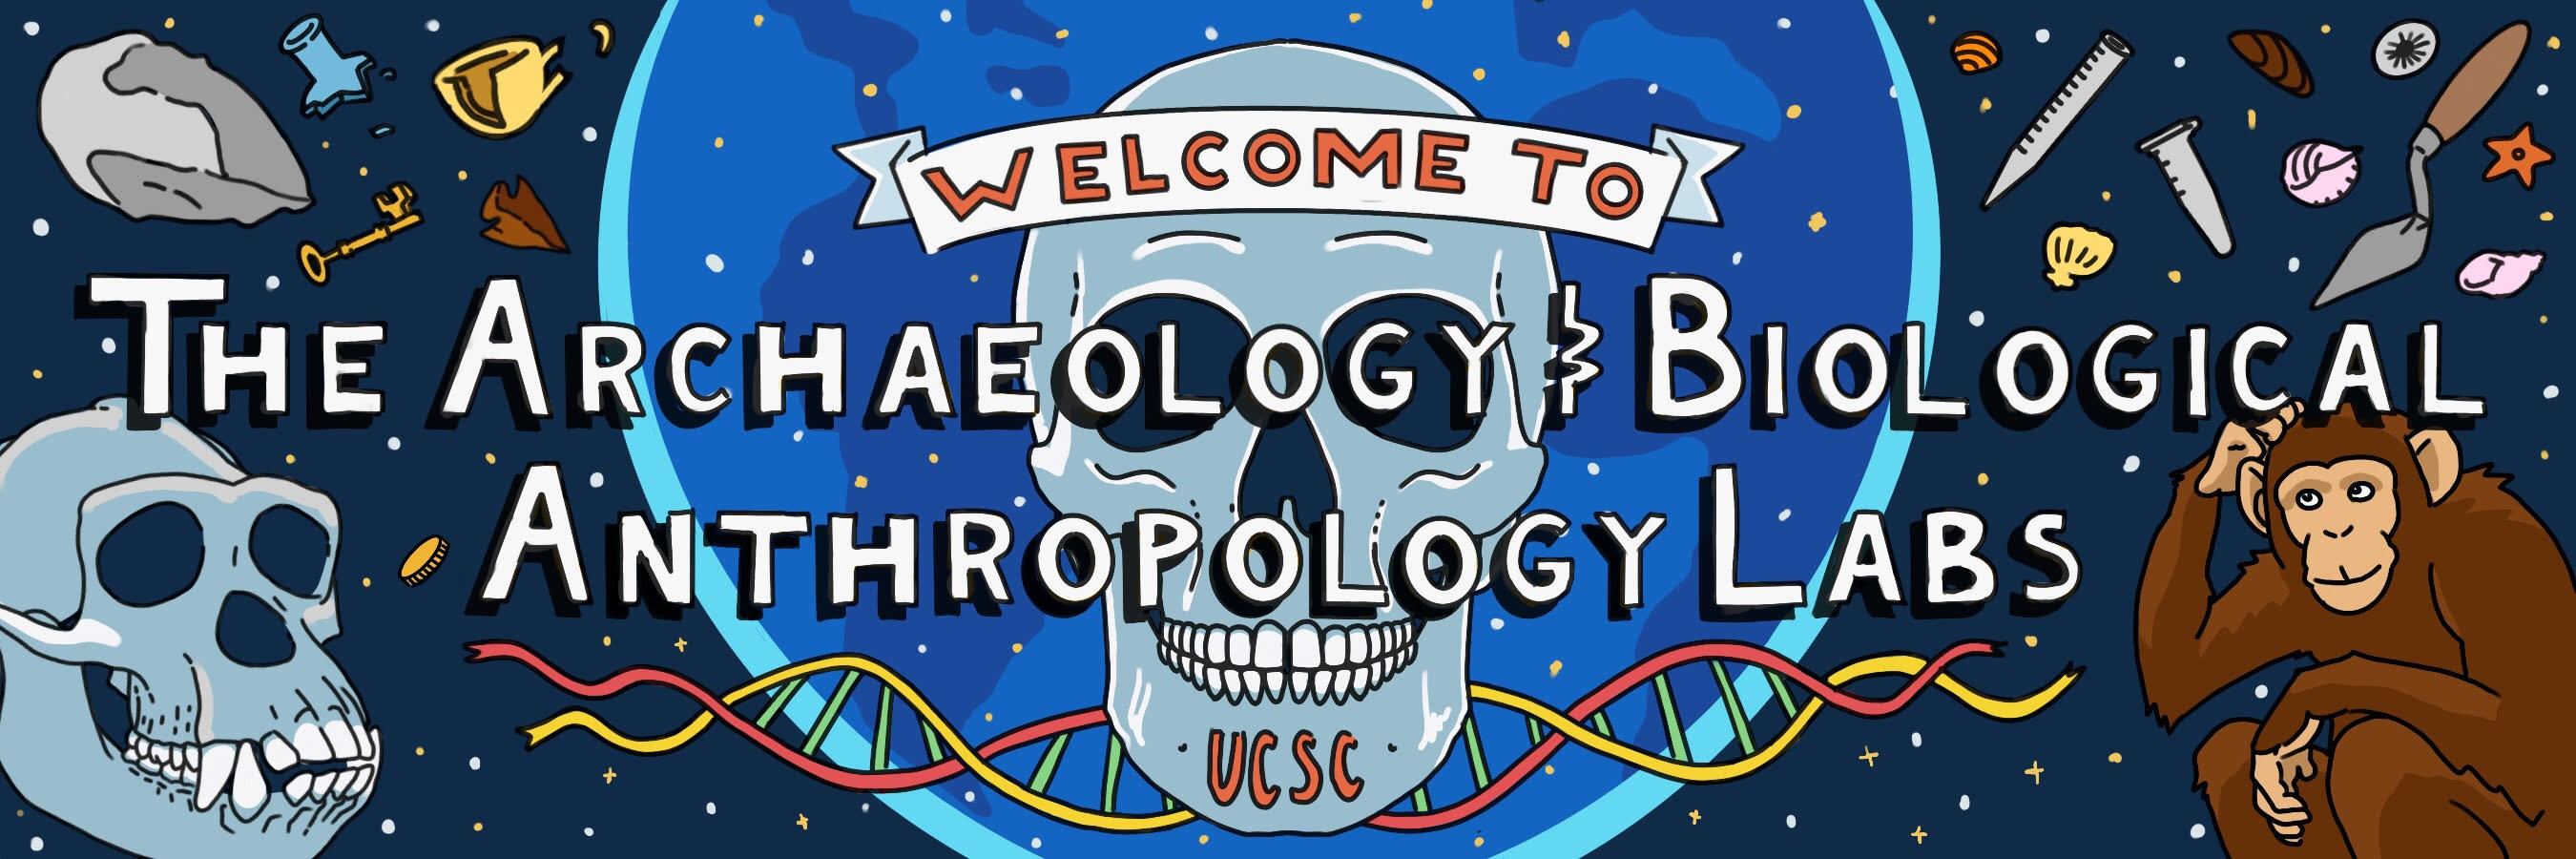 Welcome to Anthropology Labs!